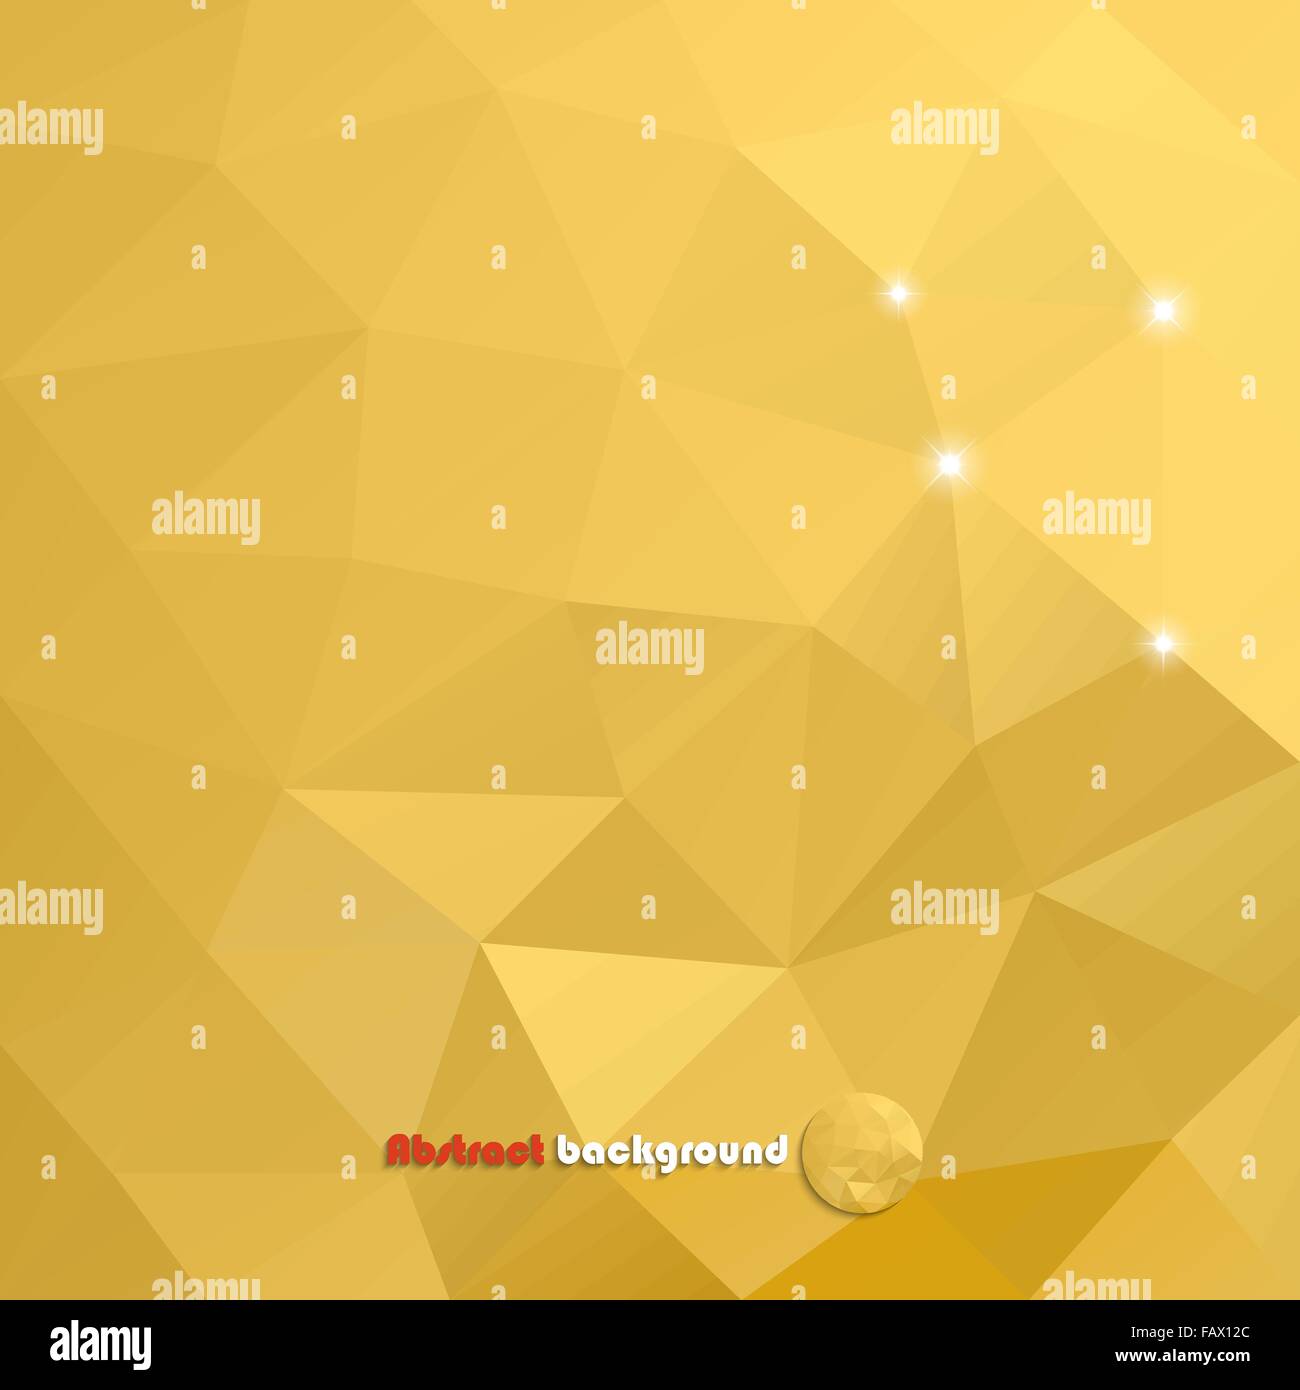 Abstract golden polygonal background for your design Stock Vector